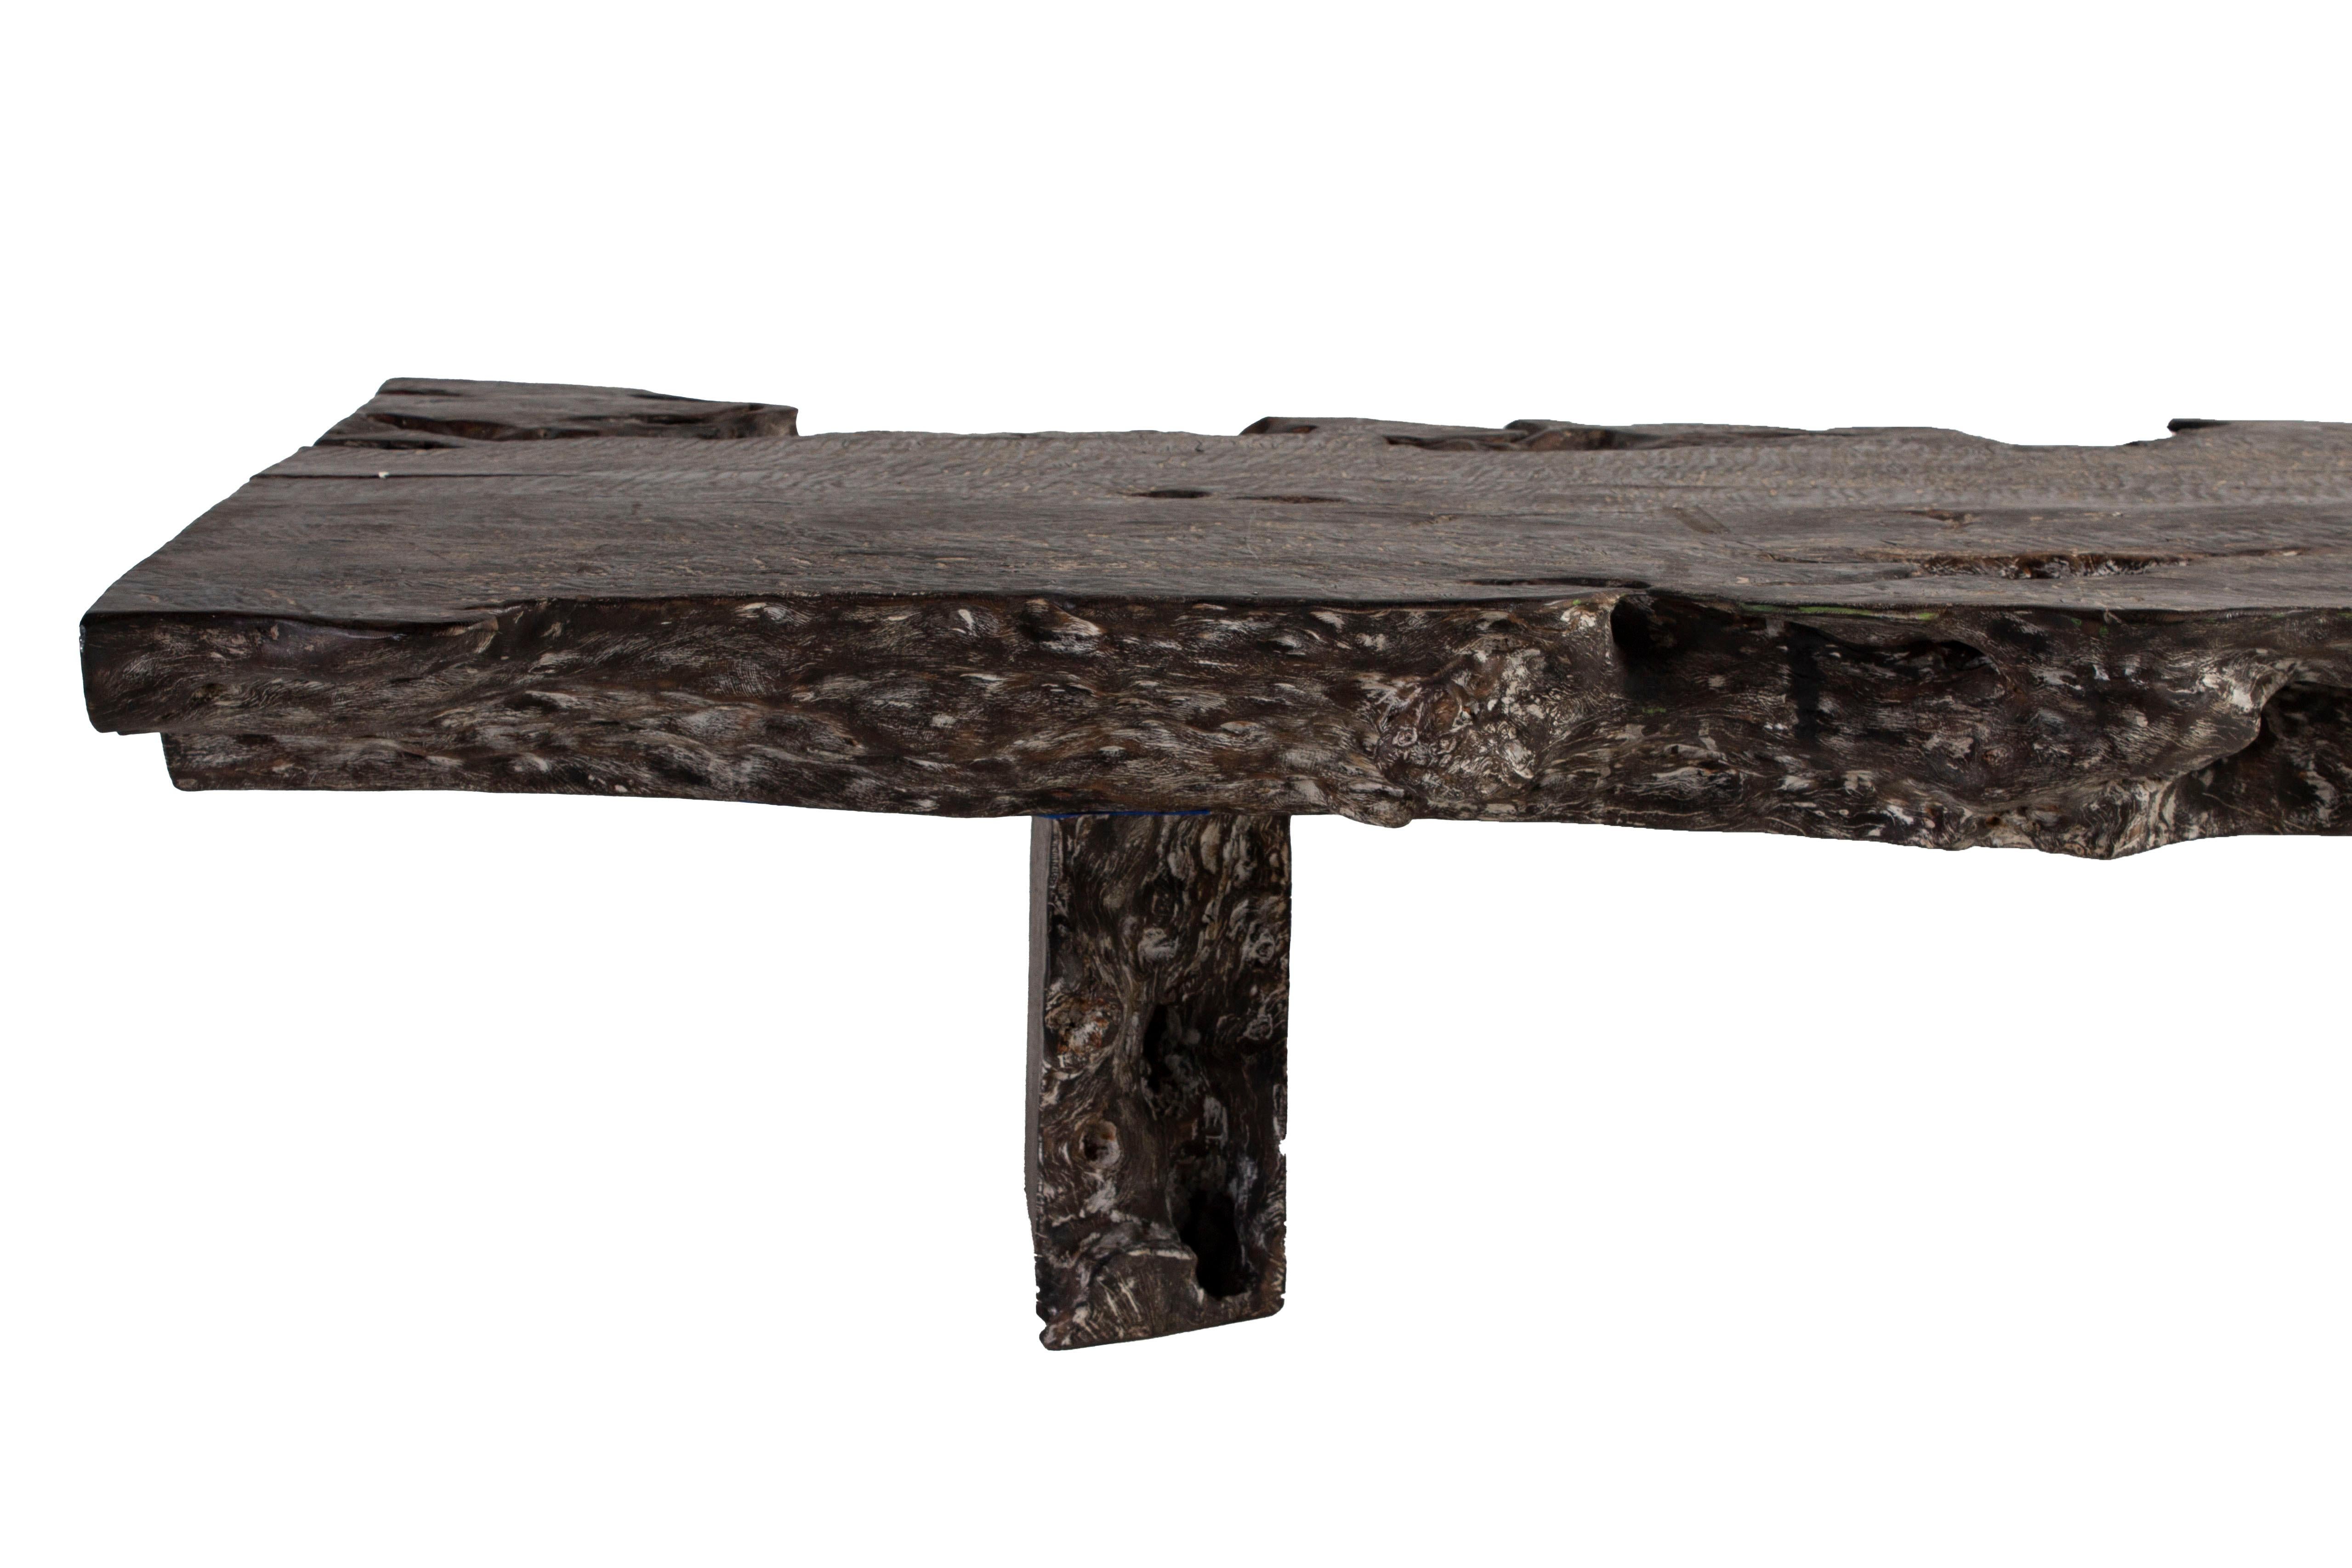 Organic form ebonized Lyche wood coffee table

Made from ebonized Lyche wood. One of a kind table imported from European trade partners.

 